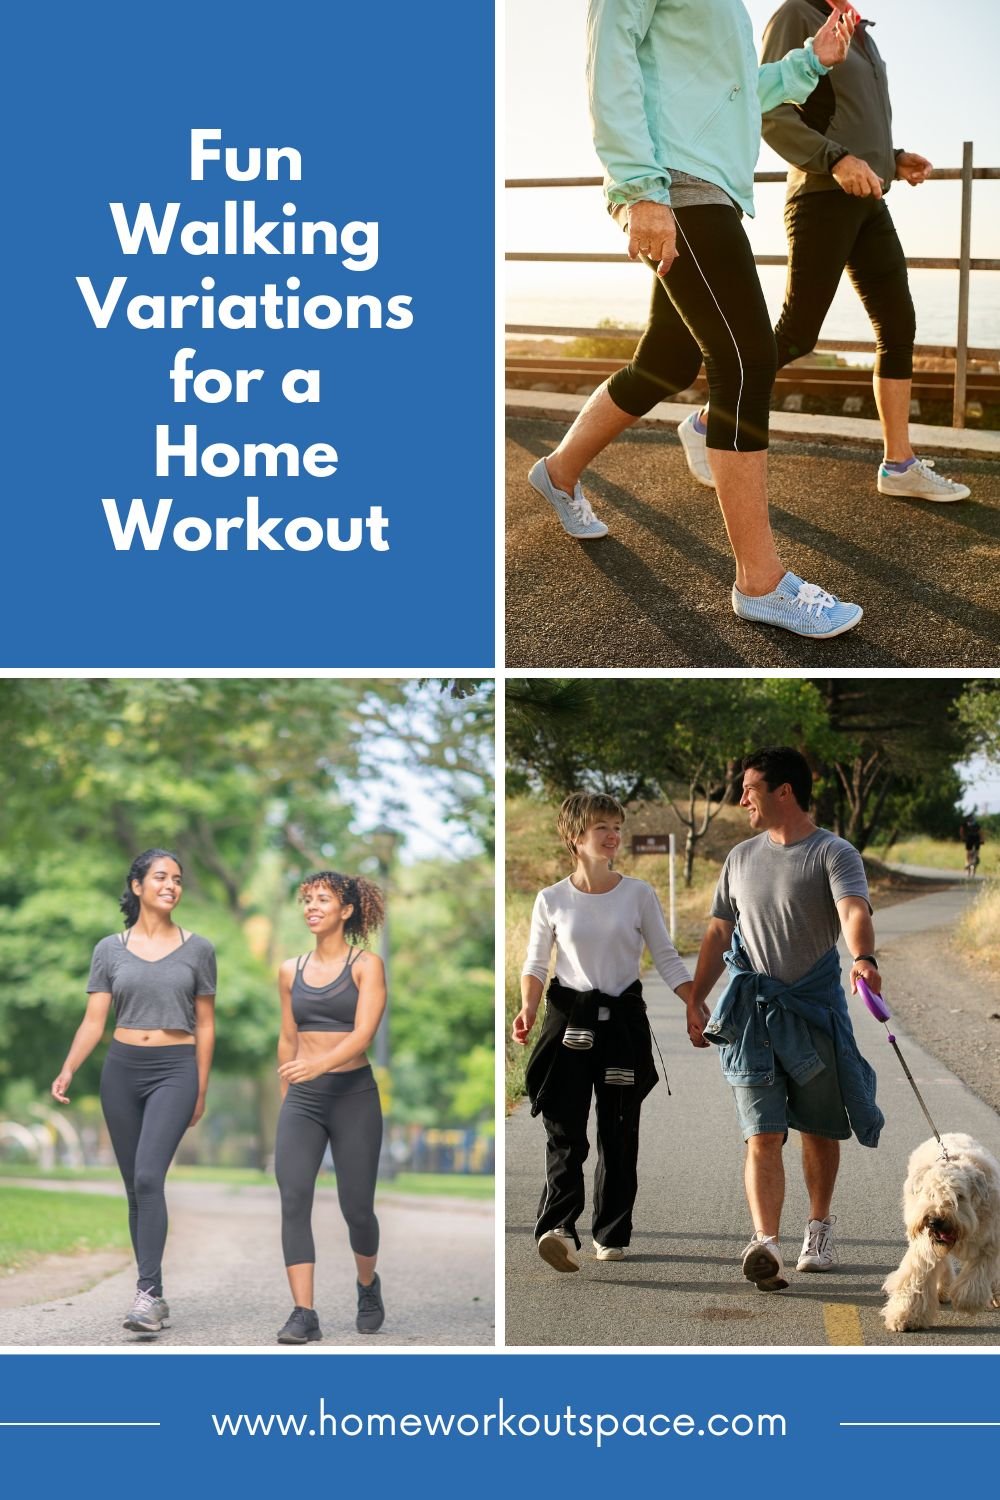 Love to Walk Fun Walking Variations for a Home Workout